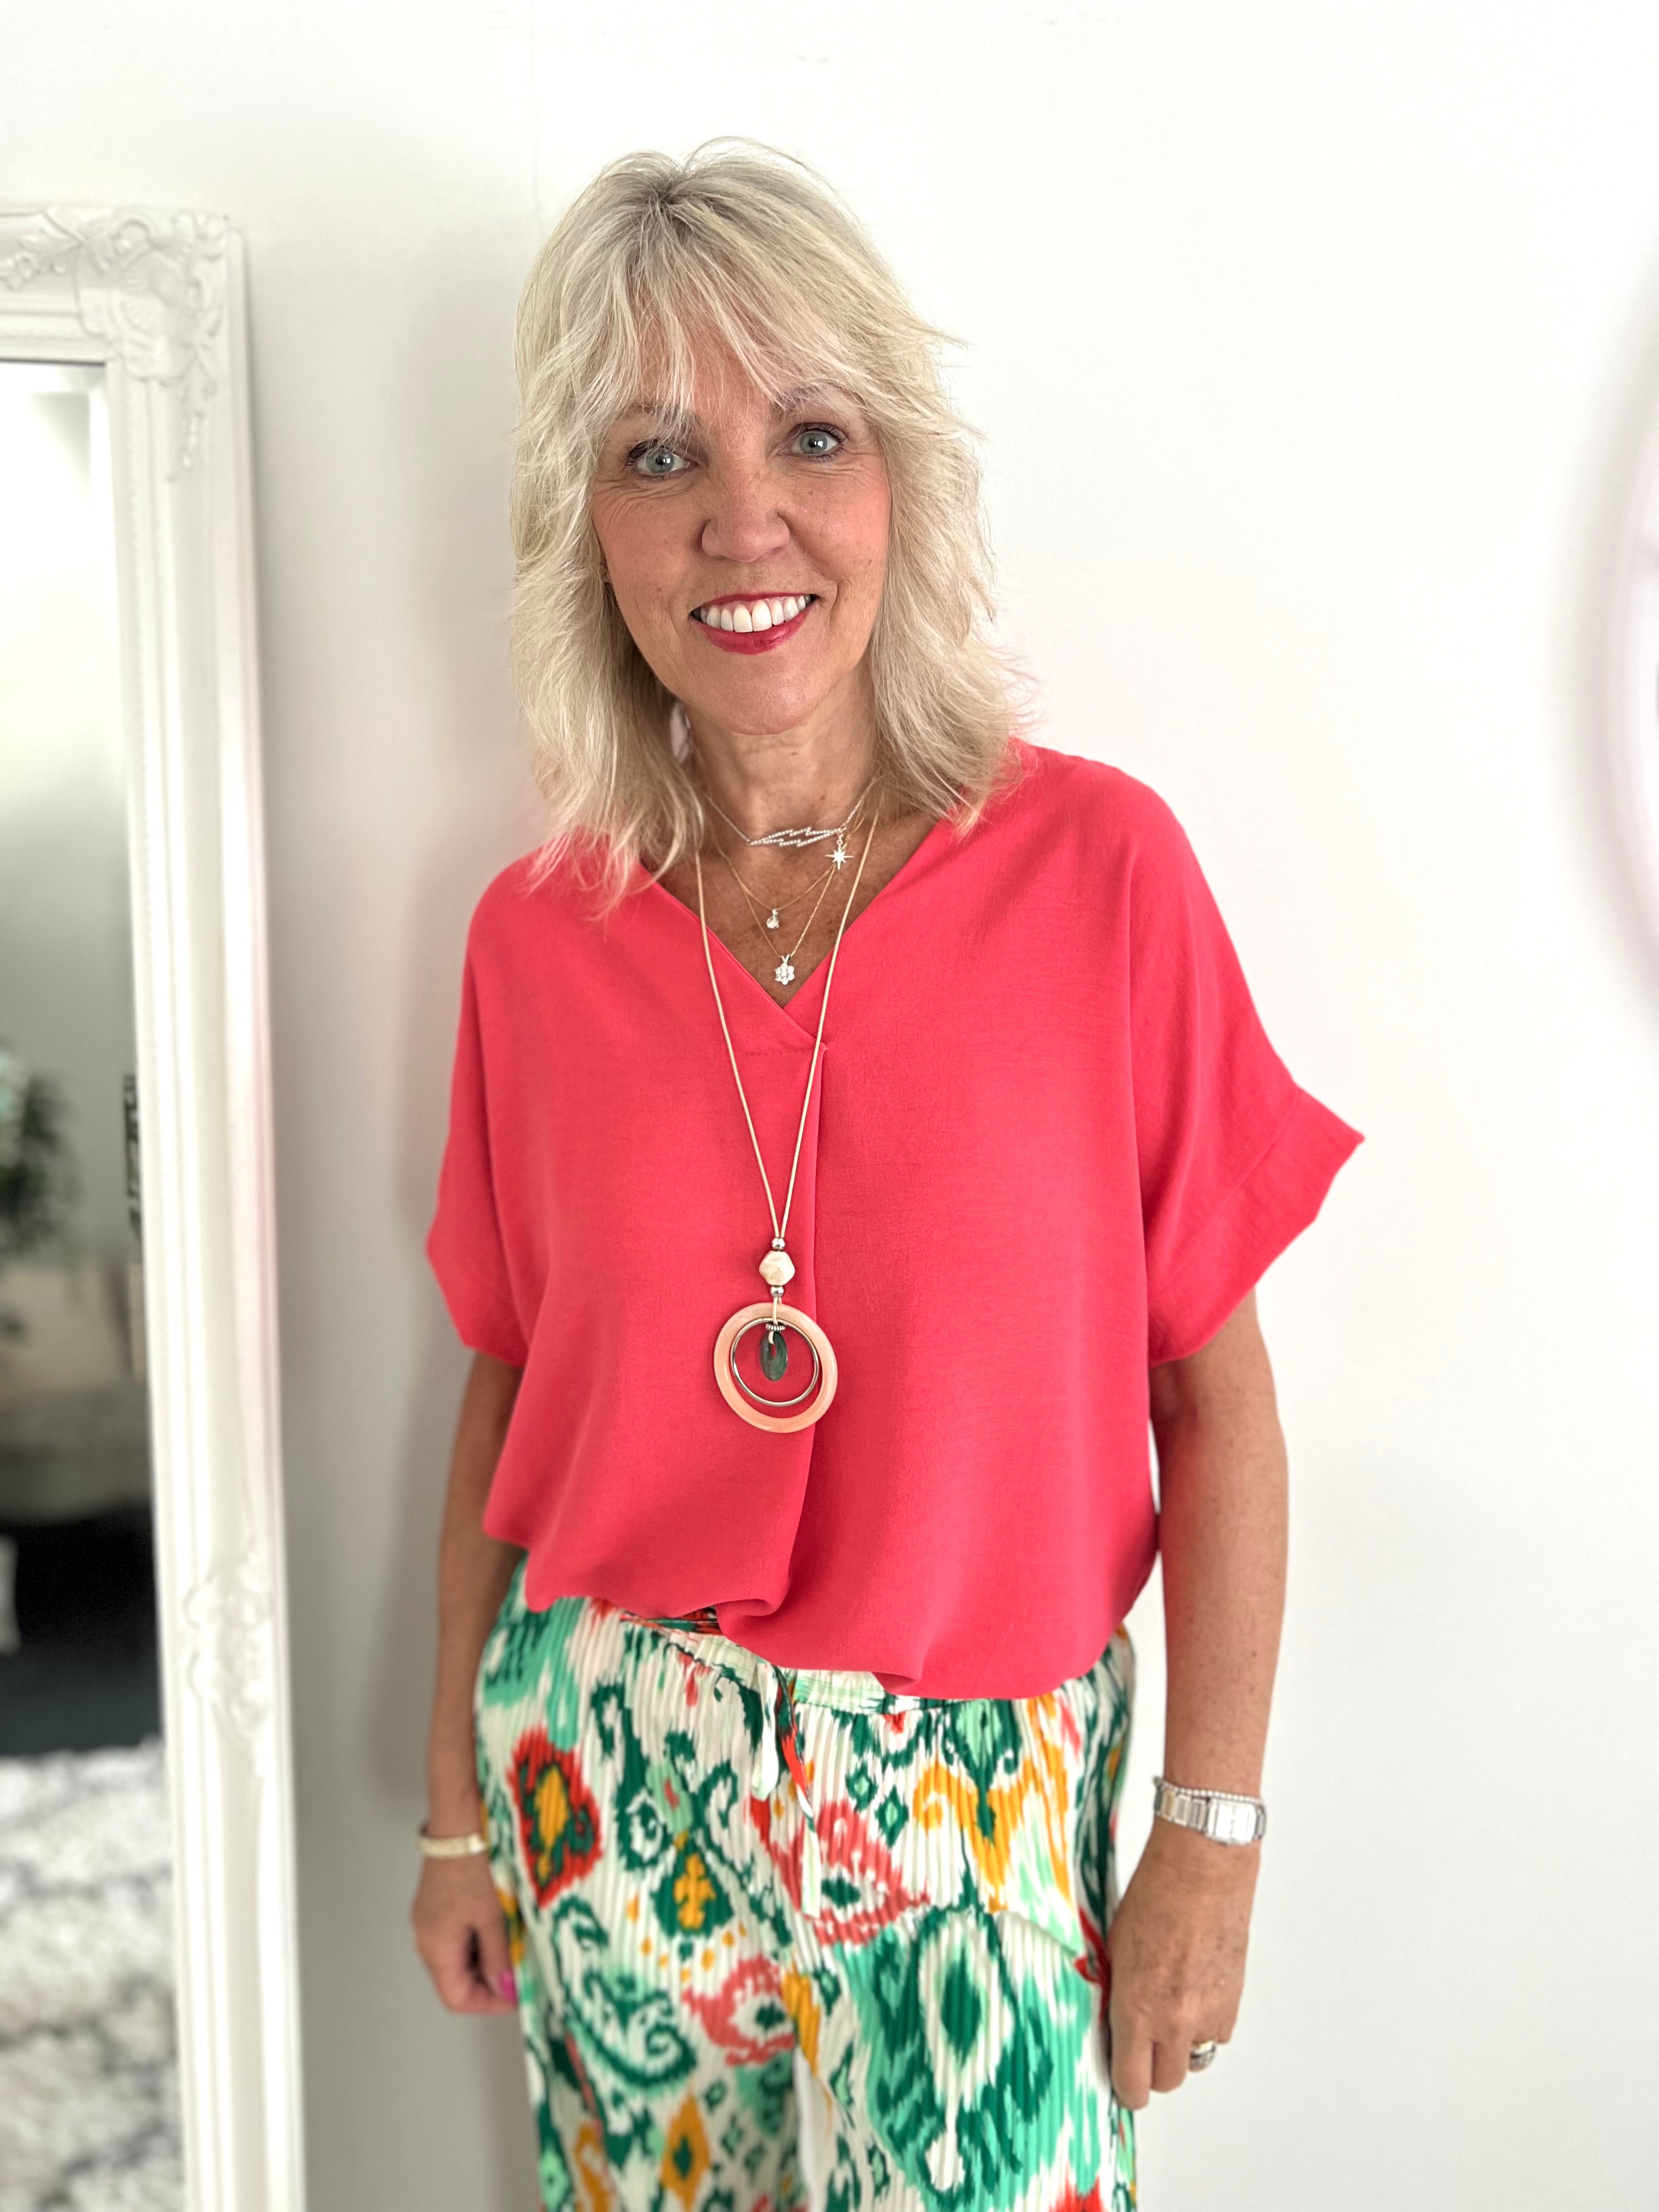 Crepe Top with Necklace in Coral